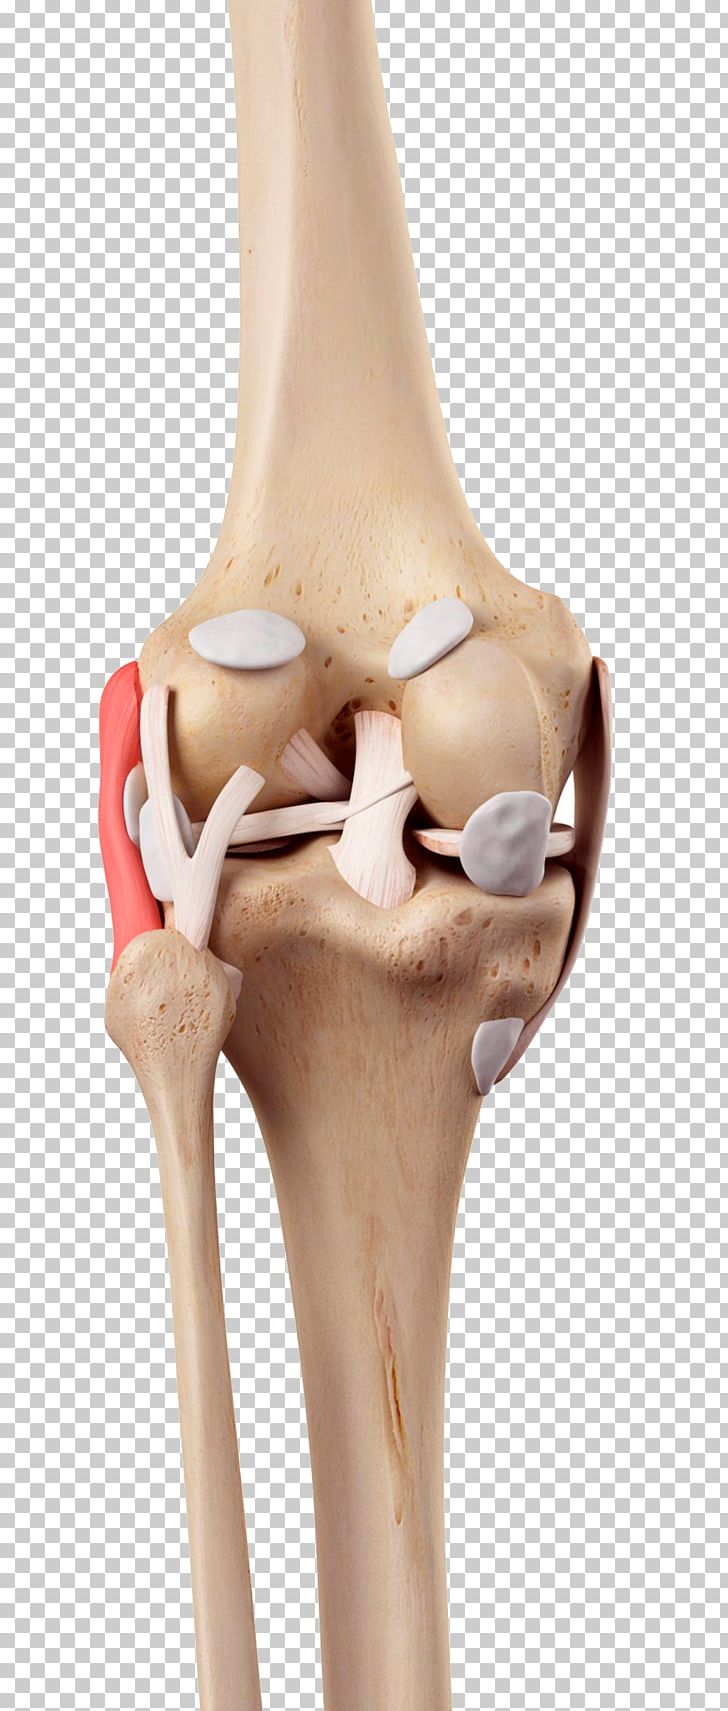 Knee Medial Collateral Ligament Fibular Collateral Ligament Anterior Cruciate Ligament PNG, Clipart, Blood, Blood Vessels, Body, Body Structure, Bone Free PNG Download